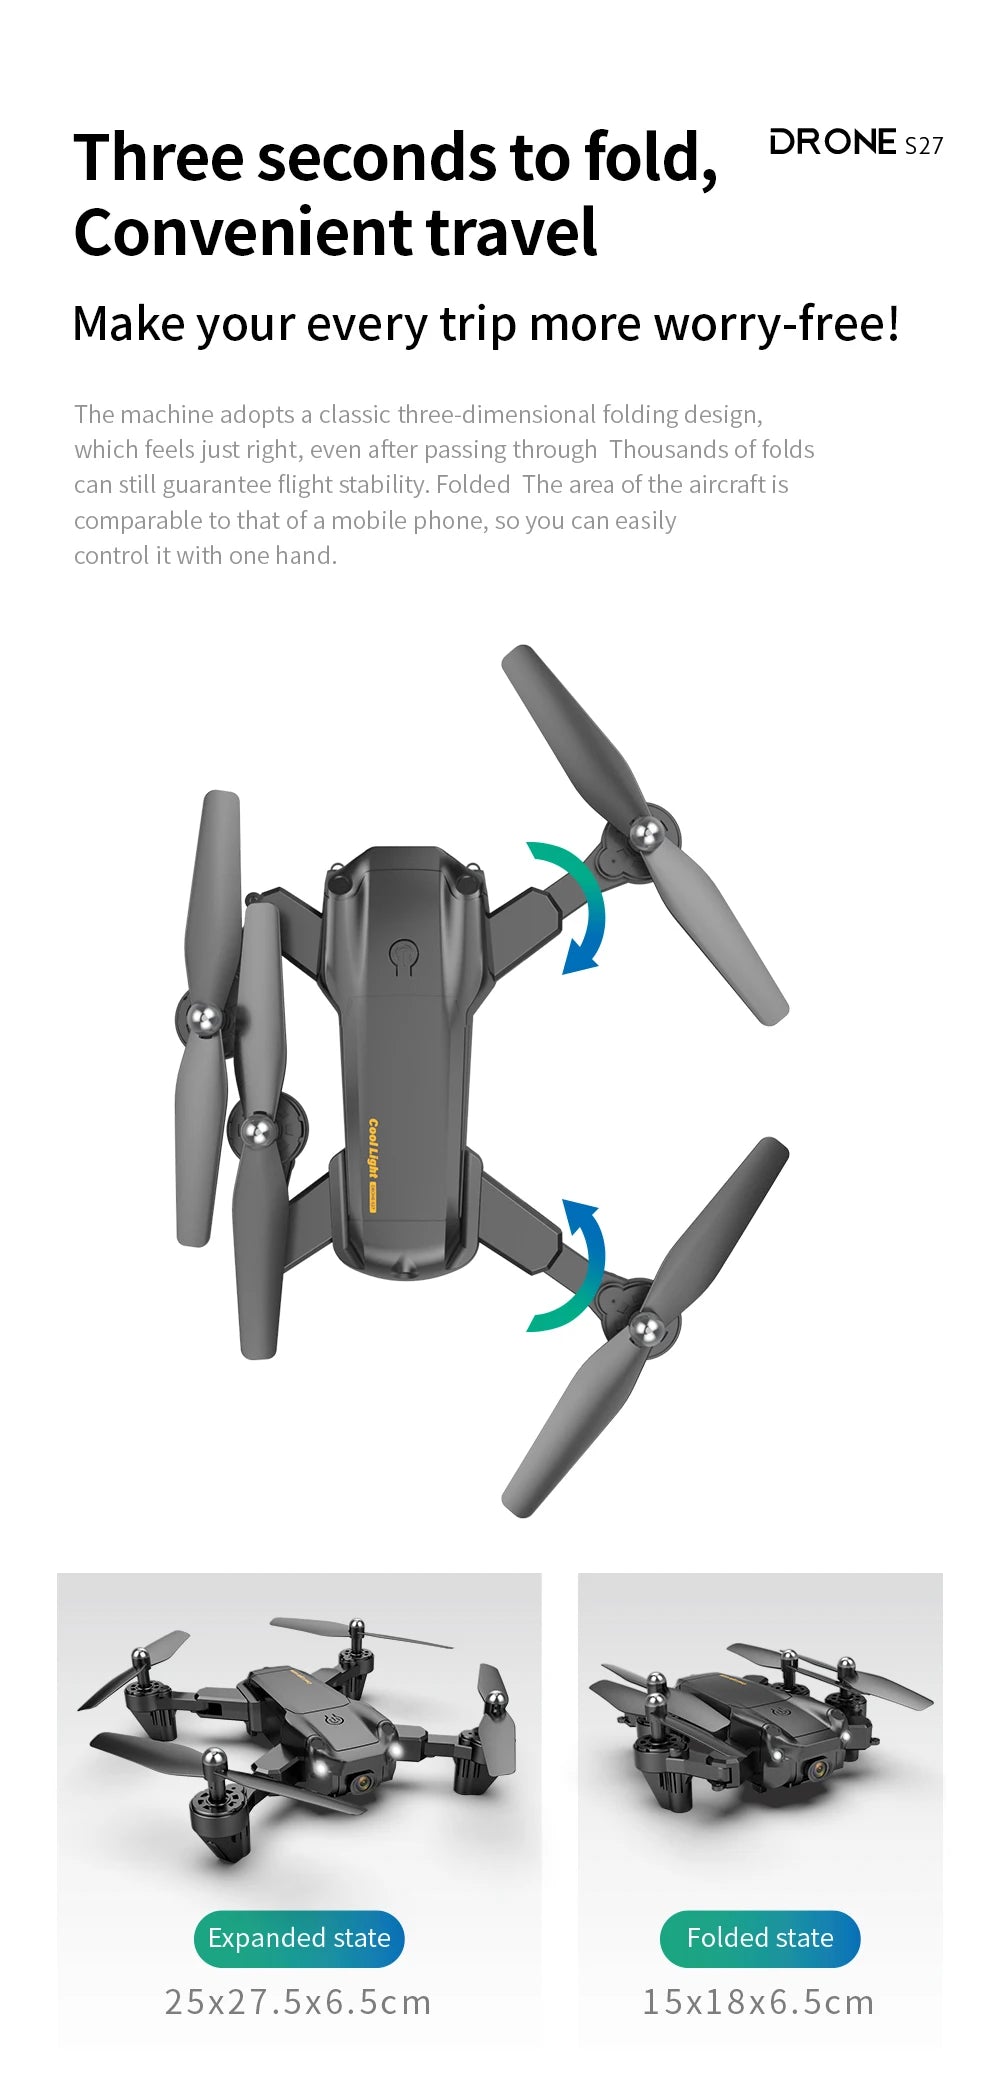 S27 Drone, drone s27 convenient travel makes your every trip more worry-free